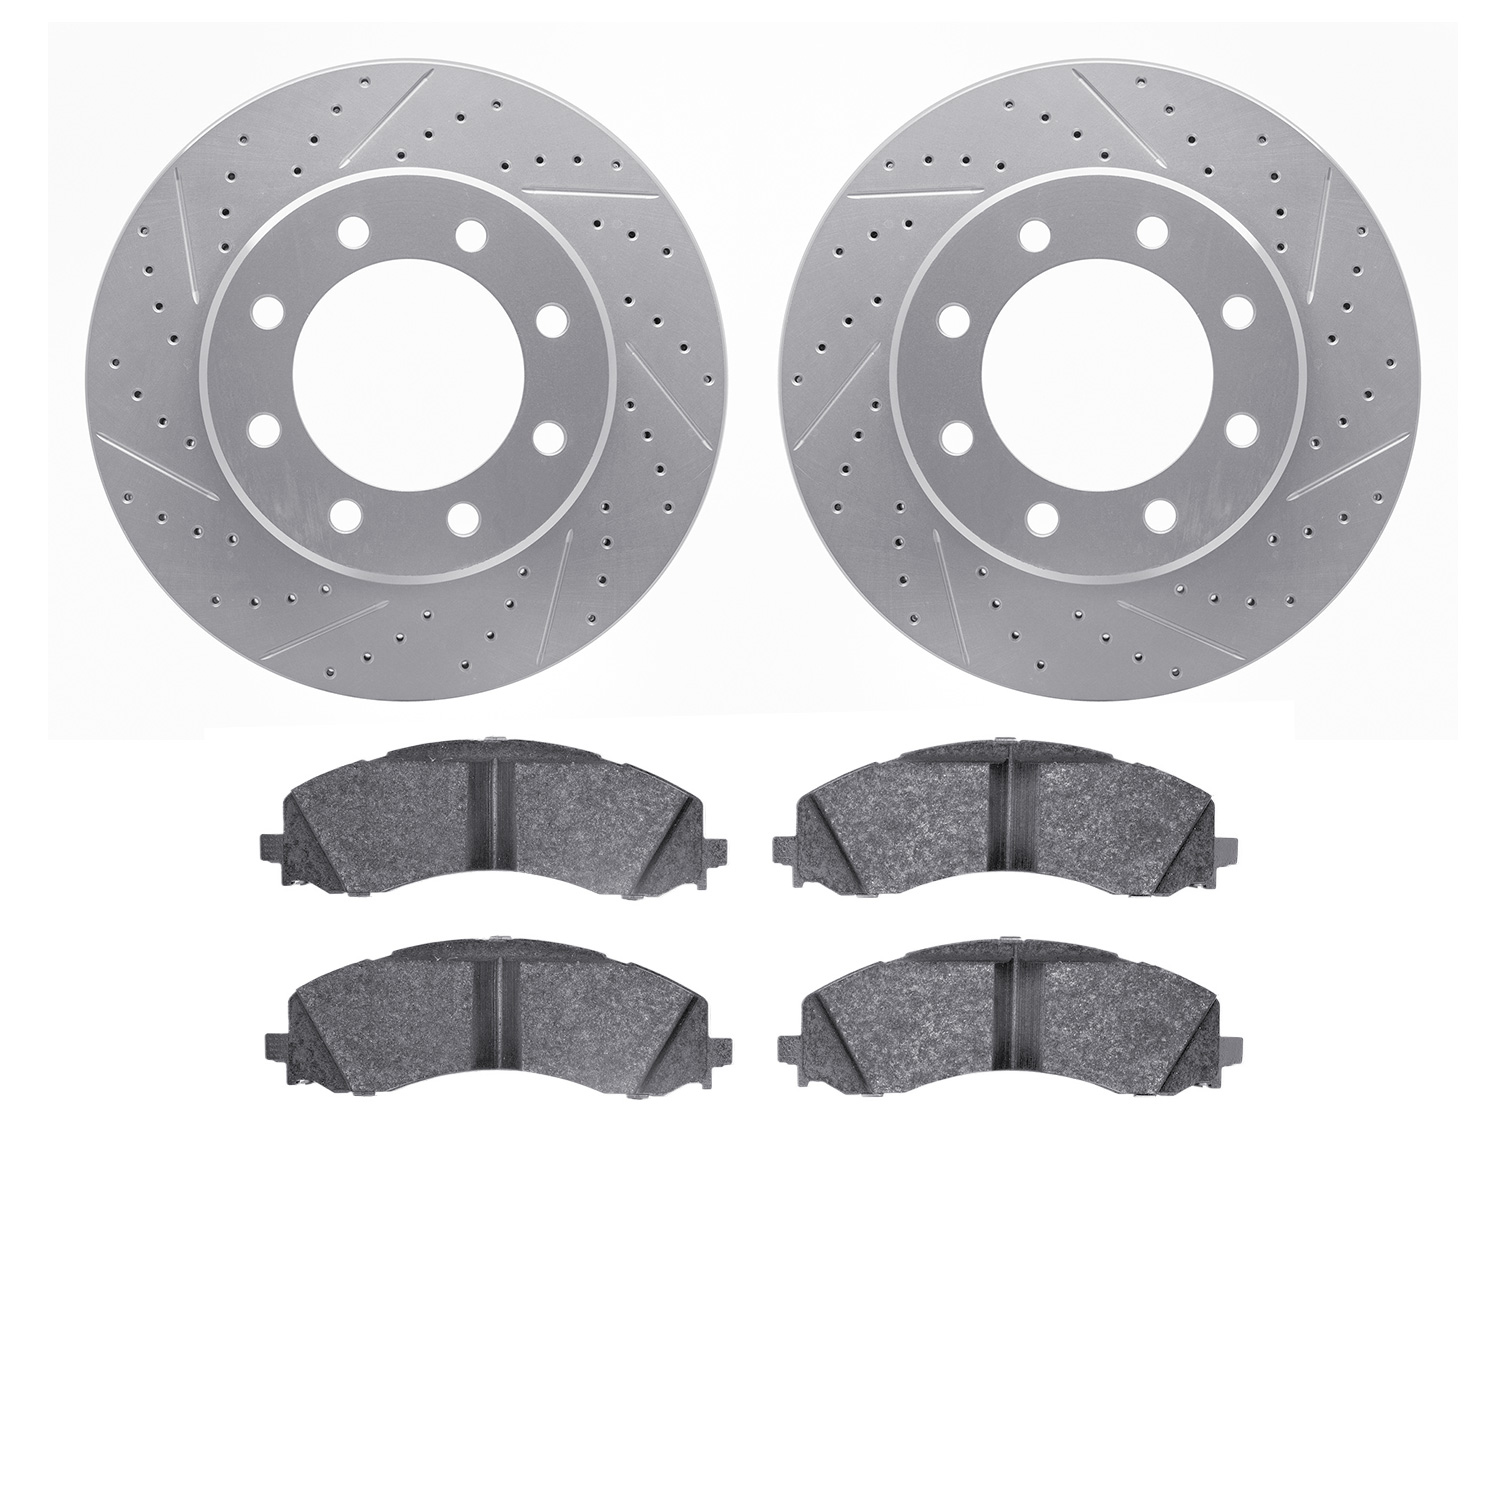 2502-40069 Geoperformance Drilled/Slotted Rotors w/5000 Advanced Brake Pads Kit, Fits Select Mopar, Position: Front